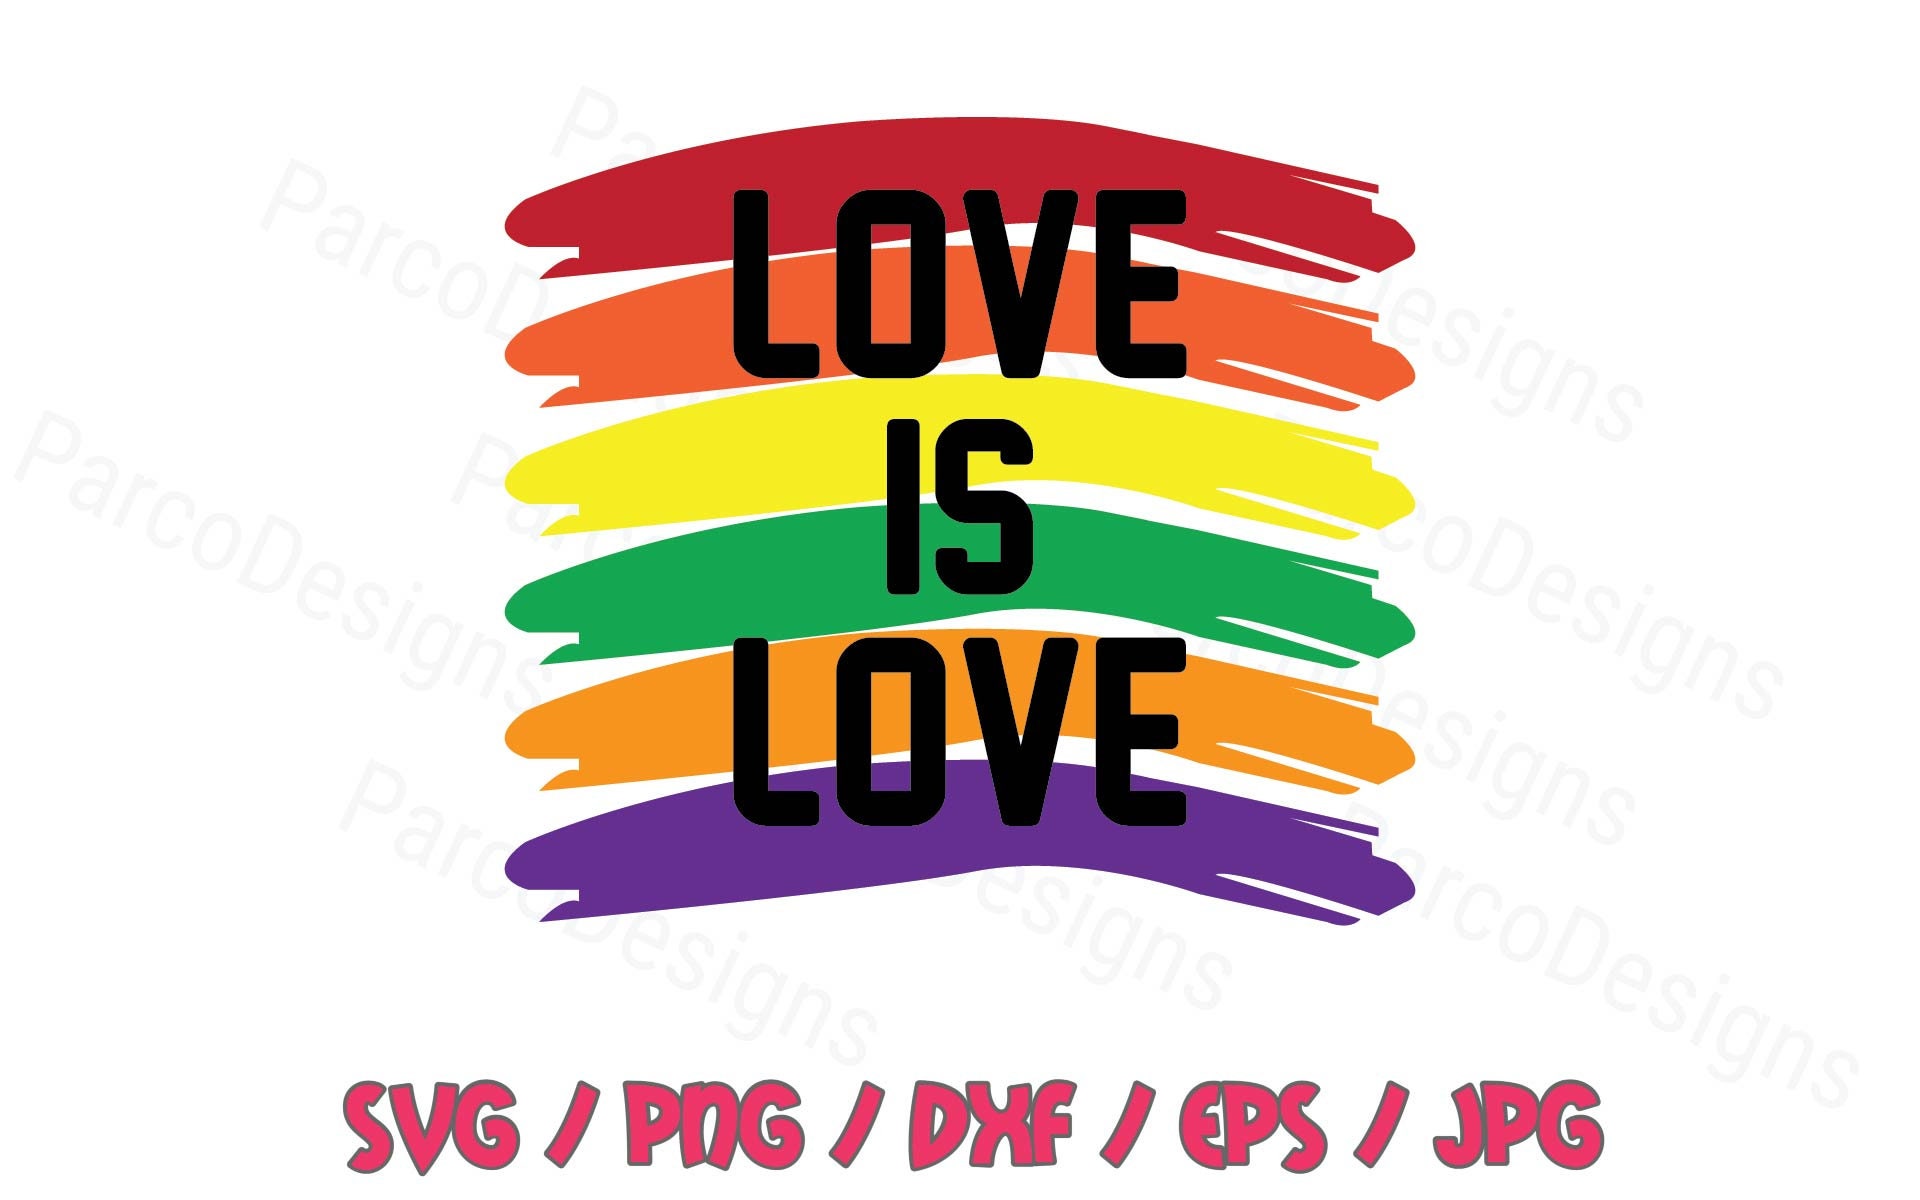 Love Is Love Svg Png Dxf Eps Jpg | Etsy